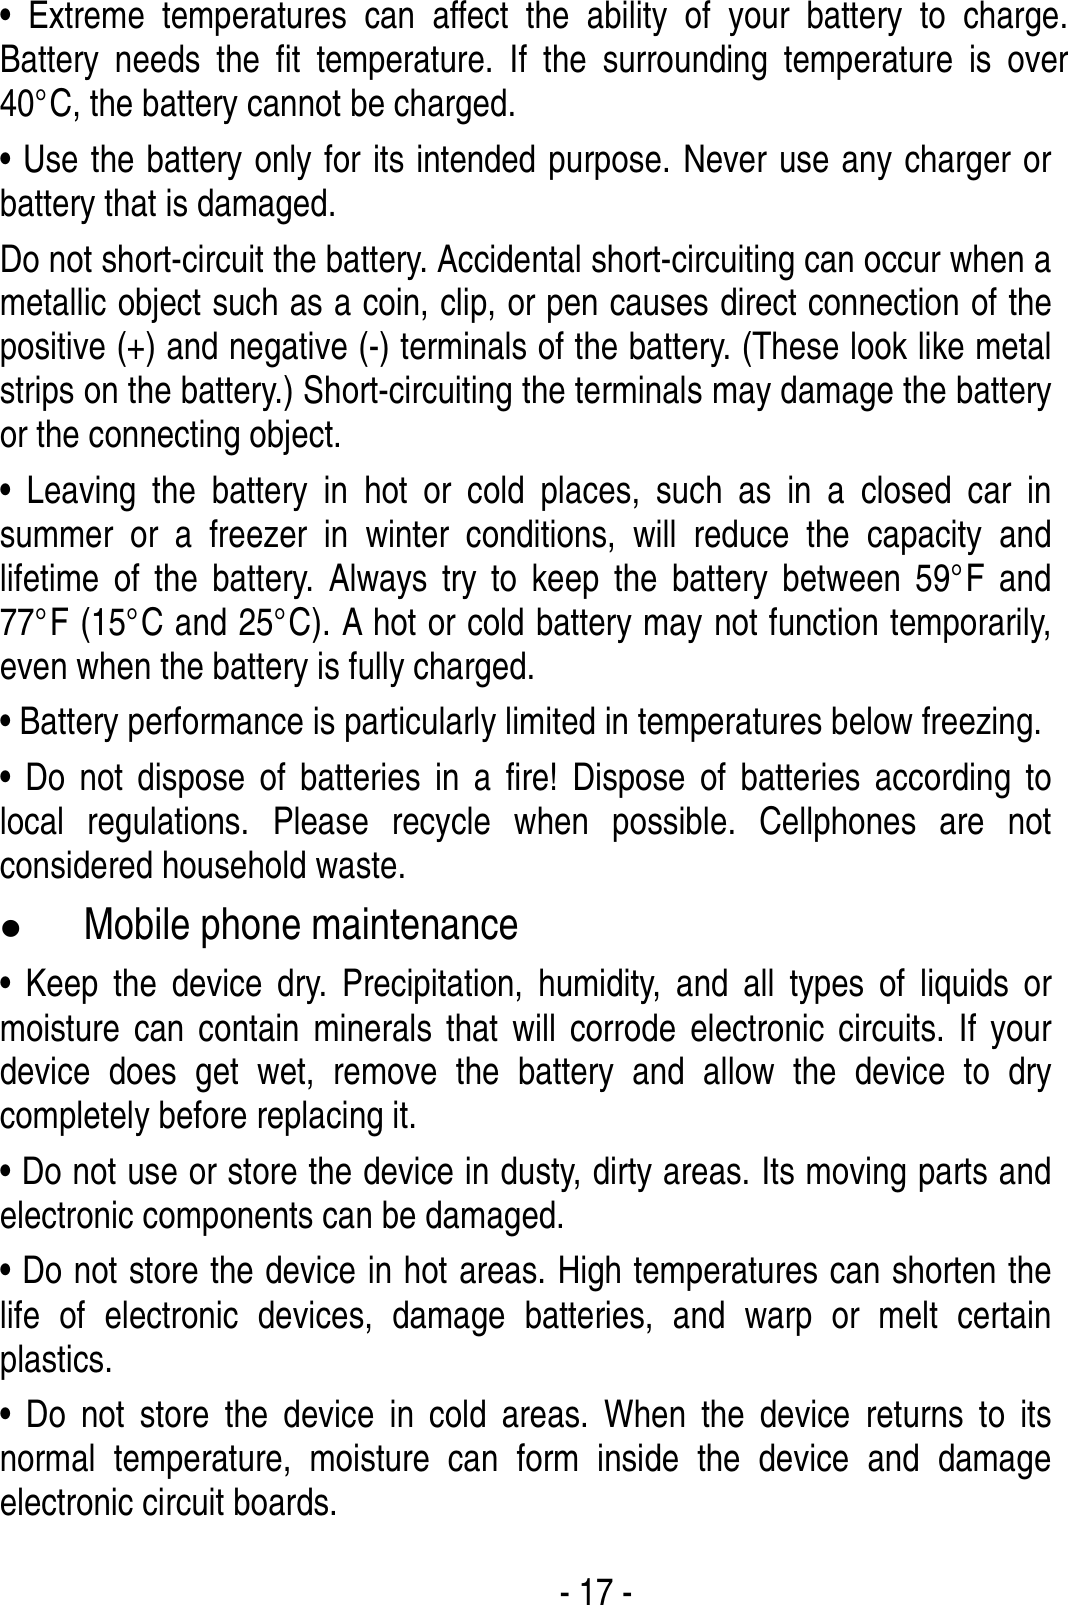  - 17 - • Extreme temperatures can affect the ability of your battery to charge. Battery needs the fit temperature. If the surrounding temperature is over 40°C, the battery cannot be charged. • Use the battery only for its intended purpose. Never use any charger or battery that is damaged. Do not short-circuit the battery. Accidental short-circuiting can occur when a metallic object such as a coin, clip, or pen causes direct connection of the positive (+) and negative (-) terminals of the battery. (These look like metal strips on the battery.) Short-circuiting the terminals may damage the battery or the connecting object. • Leaving the battery in hot or cold places, such as in a closed car in summer or a freezer in winter conditions, will reduce the capacity and lifetime of the battery. Always try to keep the battery between 59°F and 77°F (15°C and 25°C). A hot or cold battery may not function temporarily, even when the battery is fully charged. • Battery performance is particularly limited in temperatures below freezing. • Do not dispose of batteries in a fire! Dispose of batteries according to local regulations. Please recycle when possible. Cellphones are not considered household waste. z Mobile phone maintenance • Keep the device dry. Precipitation, humidity, and all types of liquids or moisture can contain minerals that will corrode electronic circuits. If your device does get wet, remove the battery and allow the device to dry completely before replacing it. • Do not use or store the device in dusty, dirty areas. Its moving parts and electronic components can be damaged. • Do not store the device in hot areas. High temperatures can shorten the life of electronic devices, damage batteries, and warp or melt certain plastics. • Do not store the device in cold areas. When the device returns to its normal temperature, moisture can form inside the device and damage electronic circuit boards. 